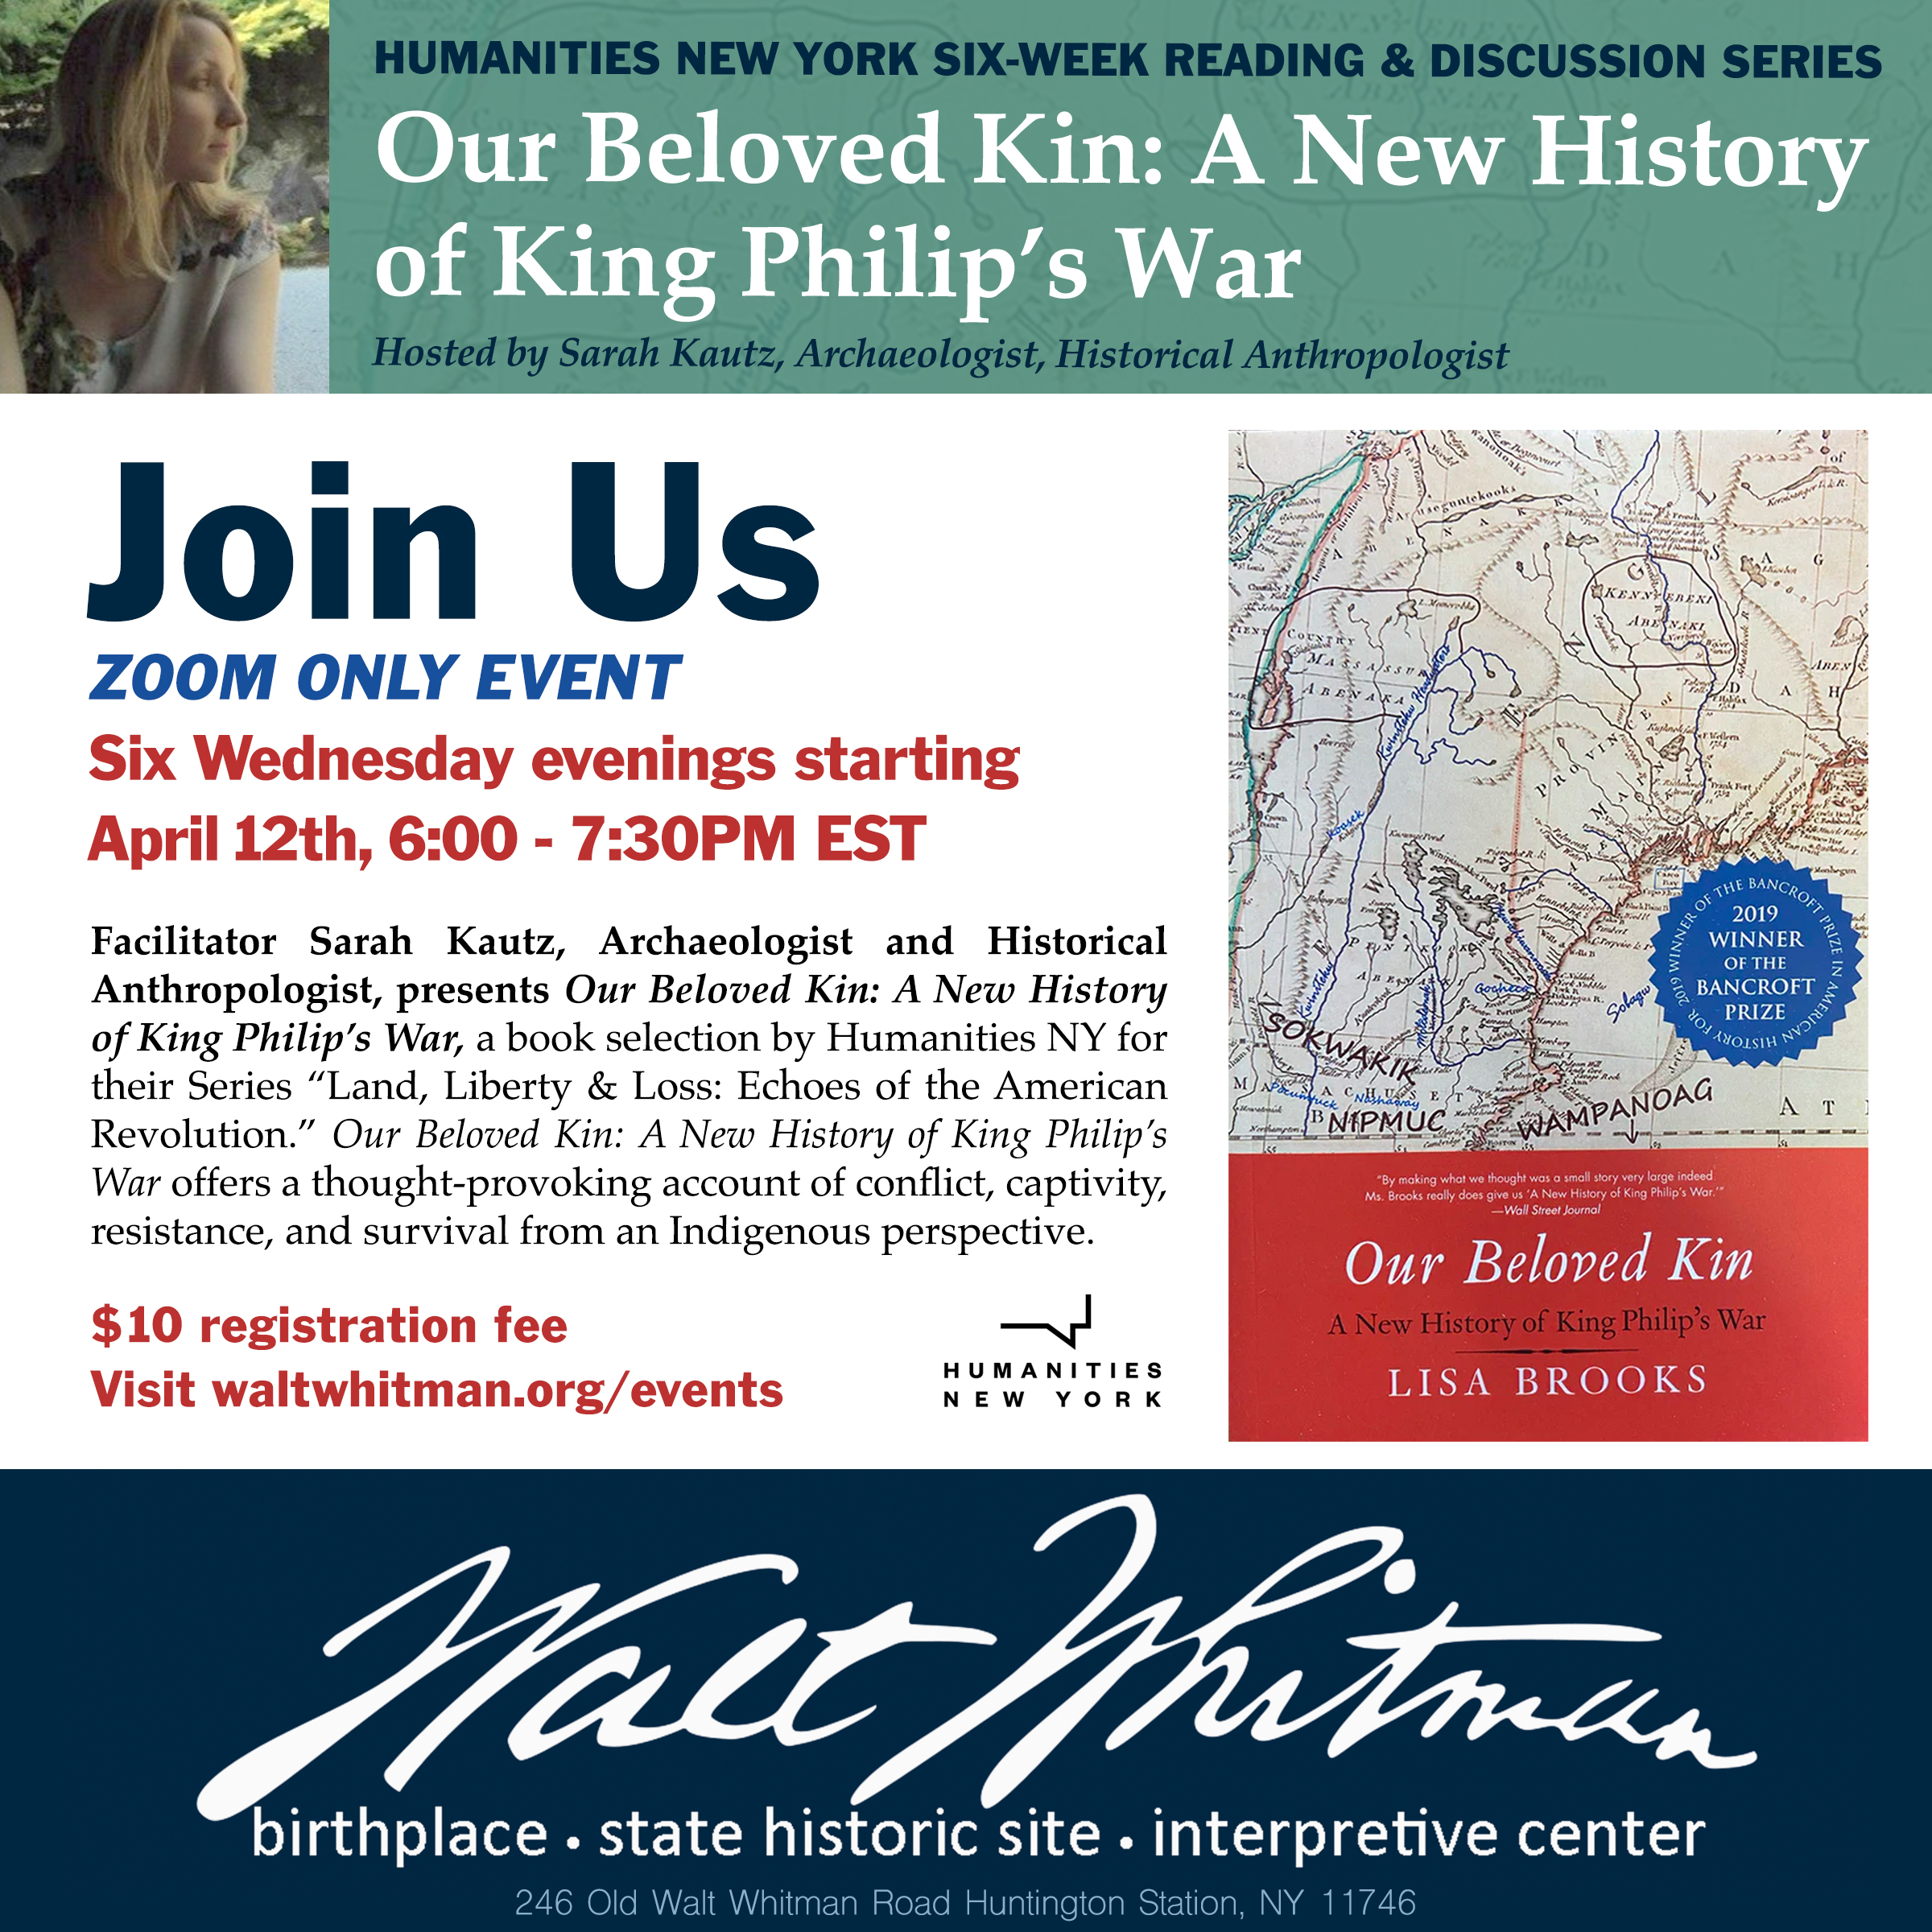 Book Discussion Group:  “Our Beloved Kin: A New History of King Philip’s War”